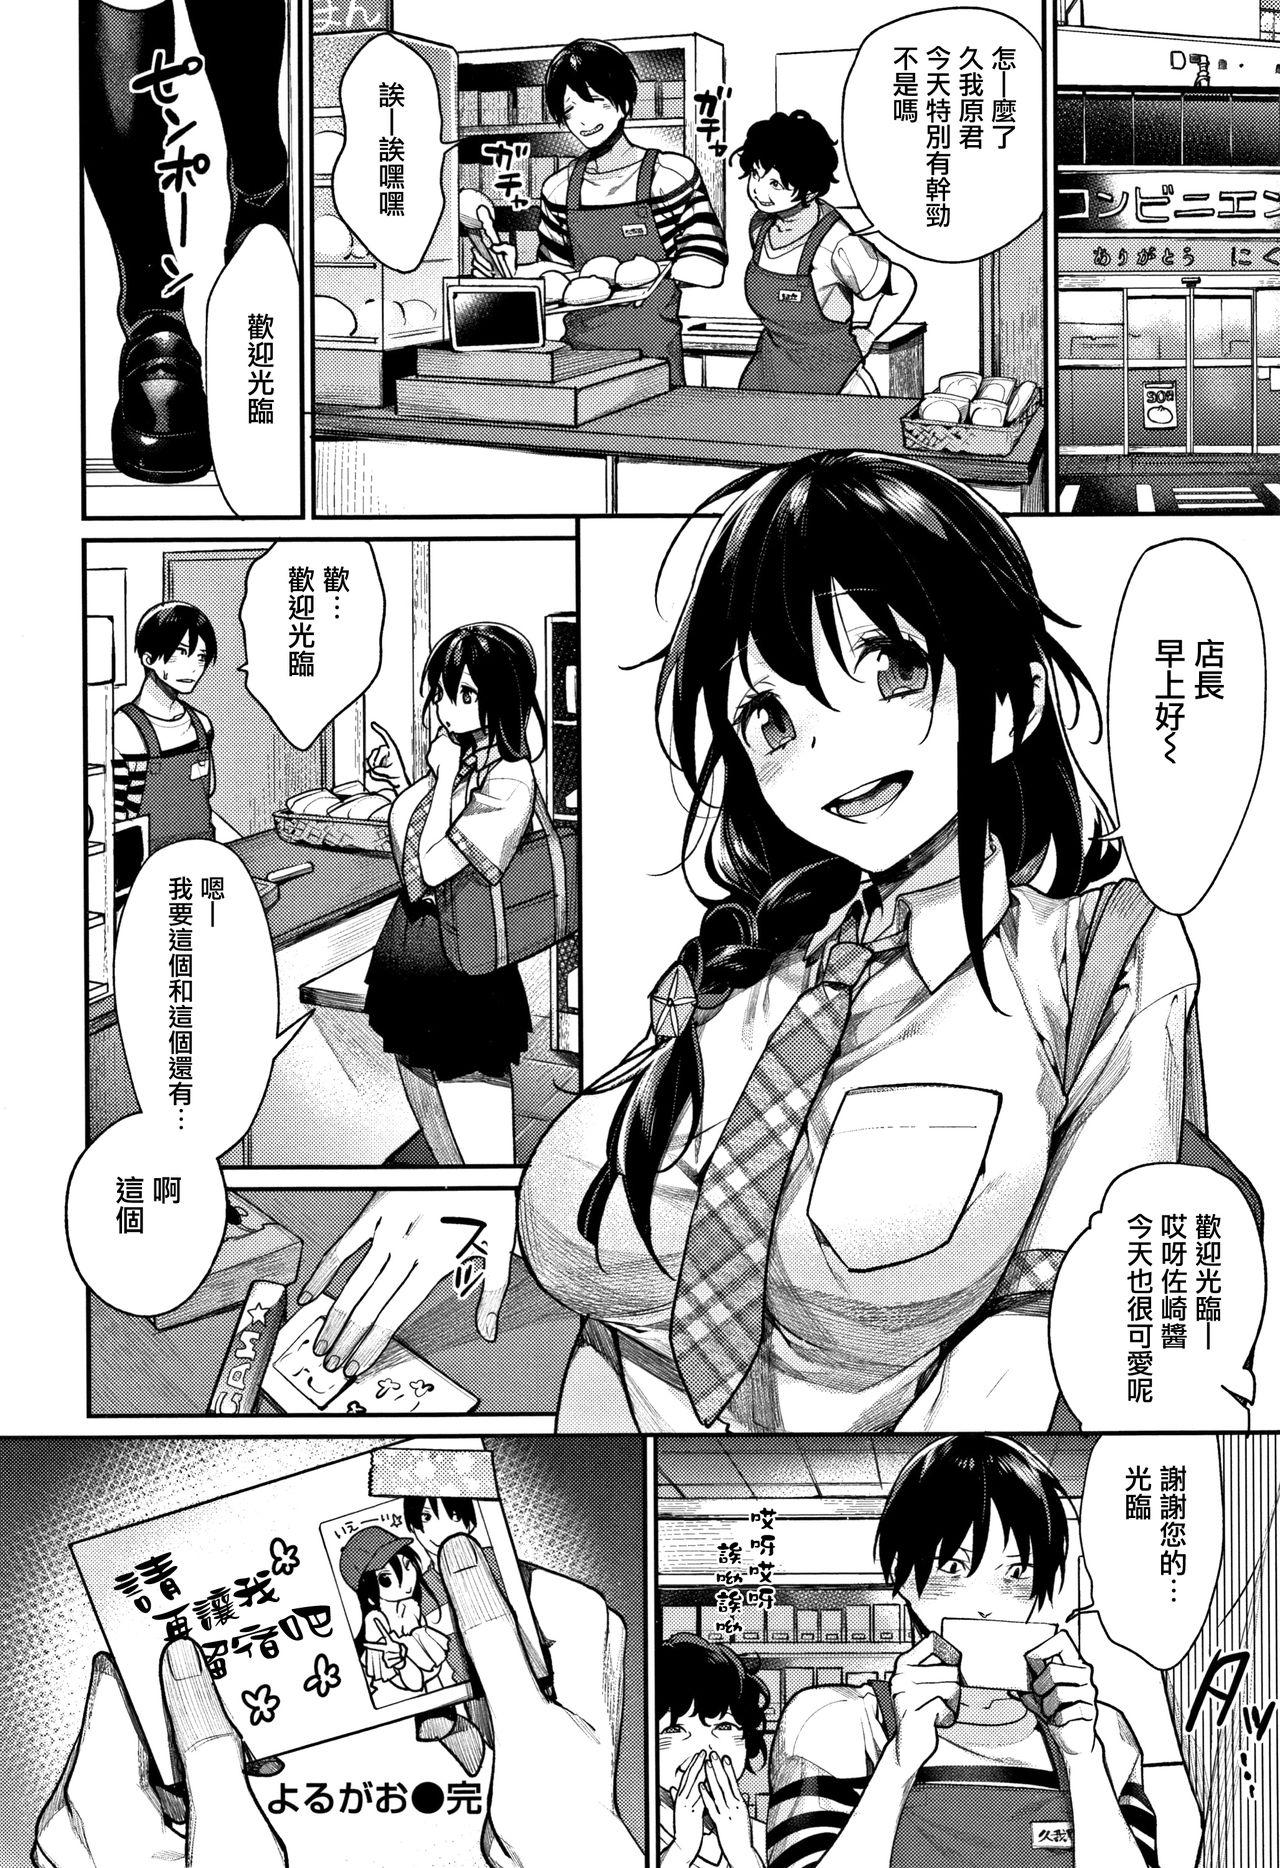 Spy Cam [MGMEE] Bokura no Etude - Our H Chu Do Ch.1-6 [Chinese] [無邪気漢化組] Hardcore Porn - Page 154